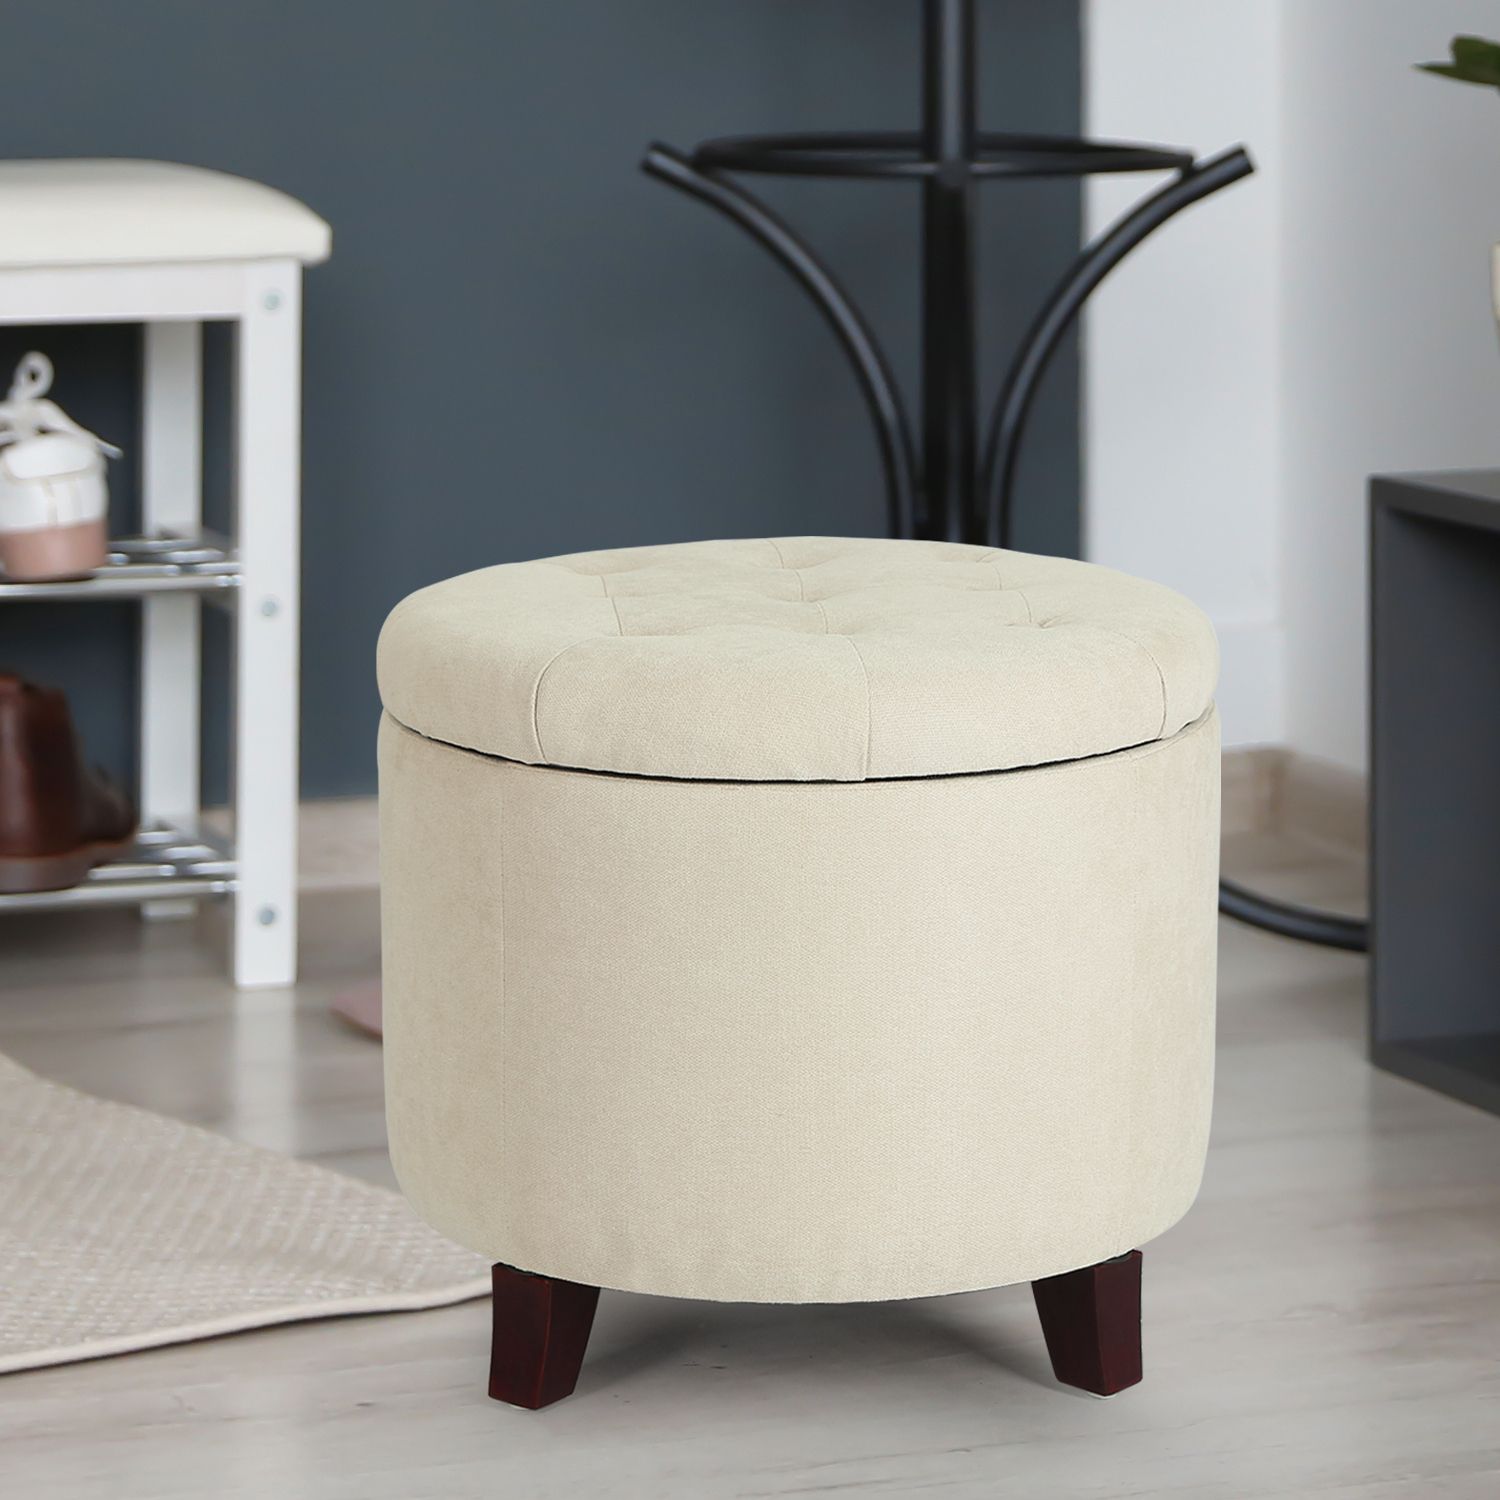 Joveco Fabric Cushion Round Button Tufted Lift Top Storage Ottoman Intended For Fabric Tufted Storage Ottomans (View 12 of 20)